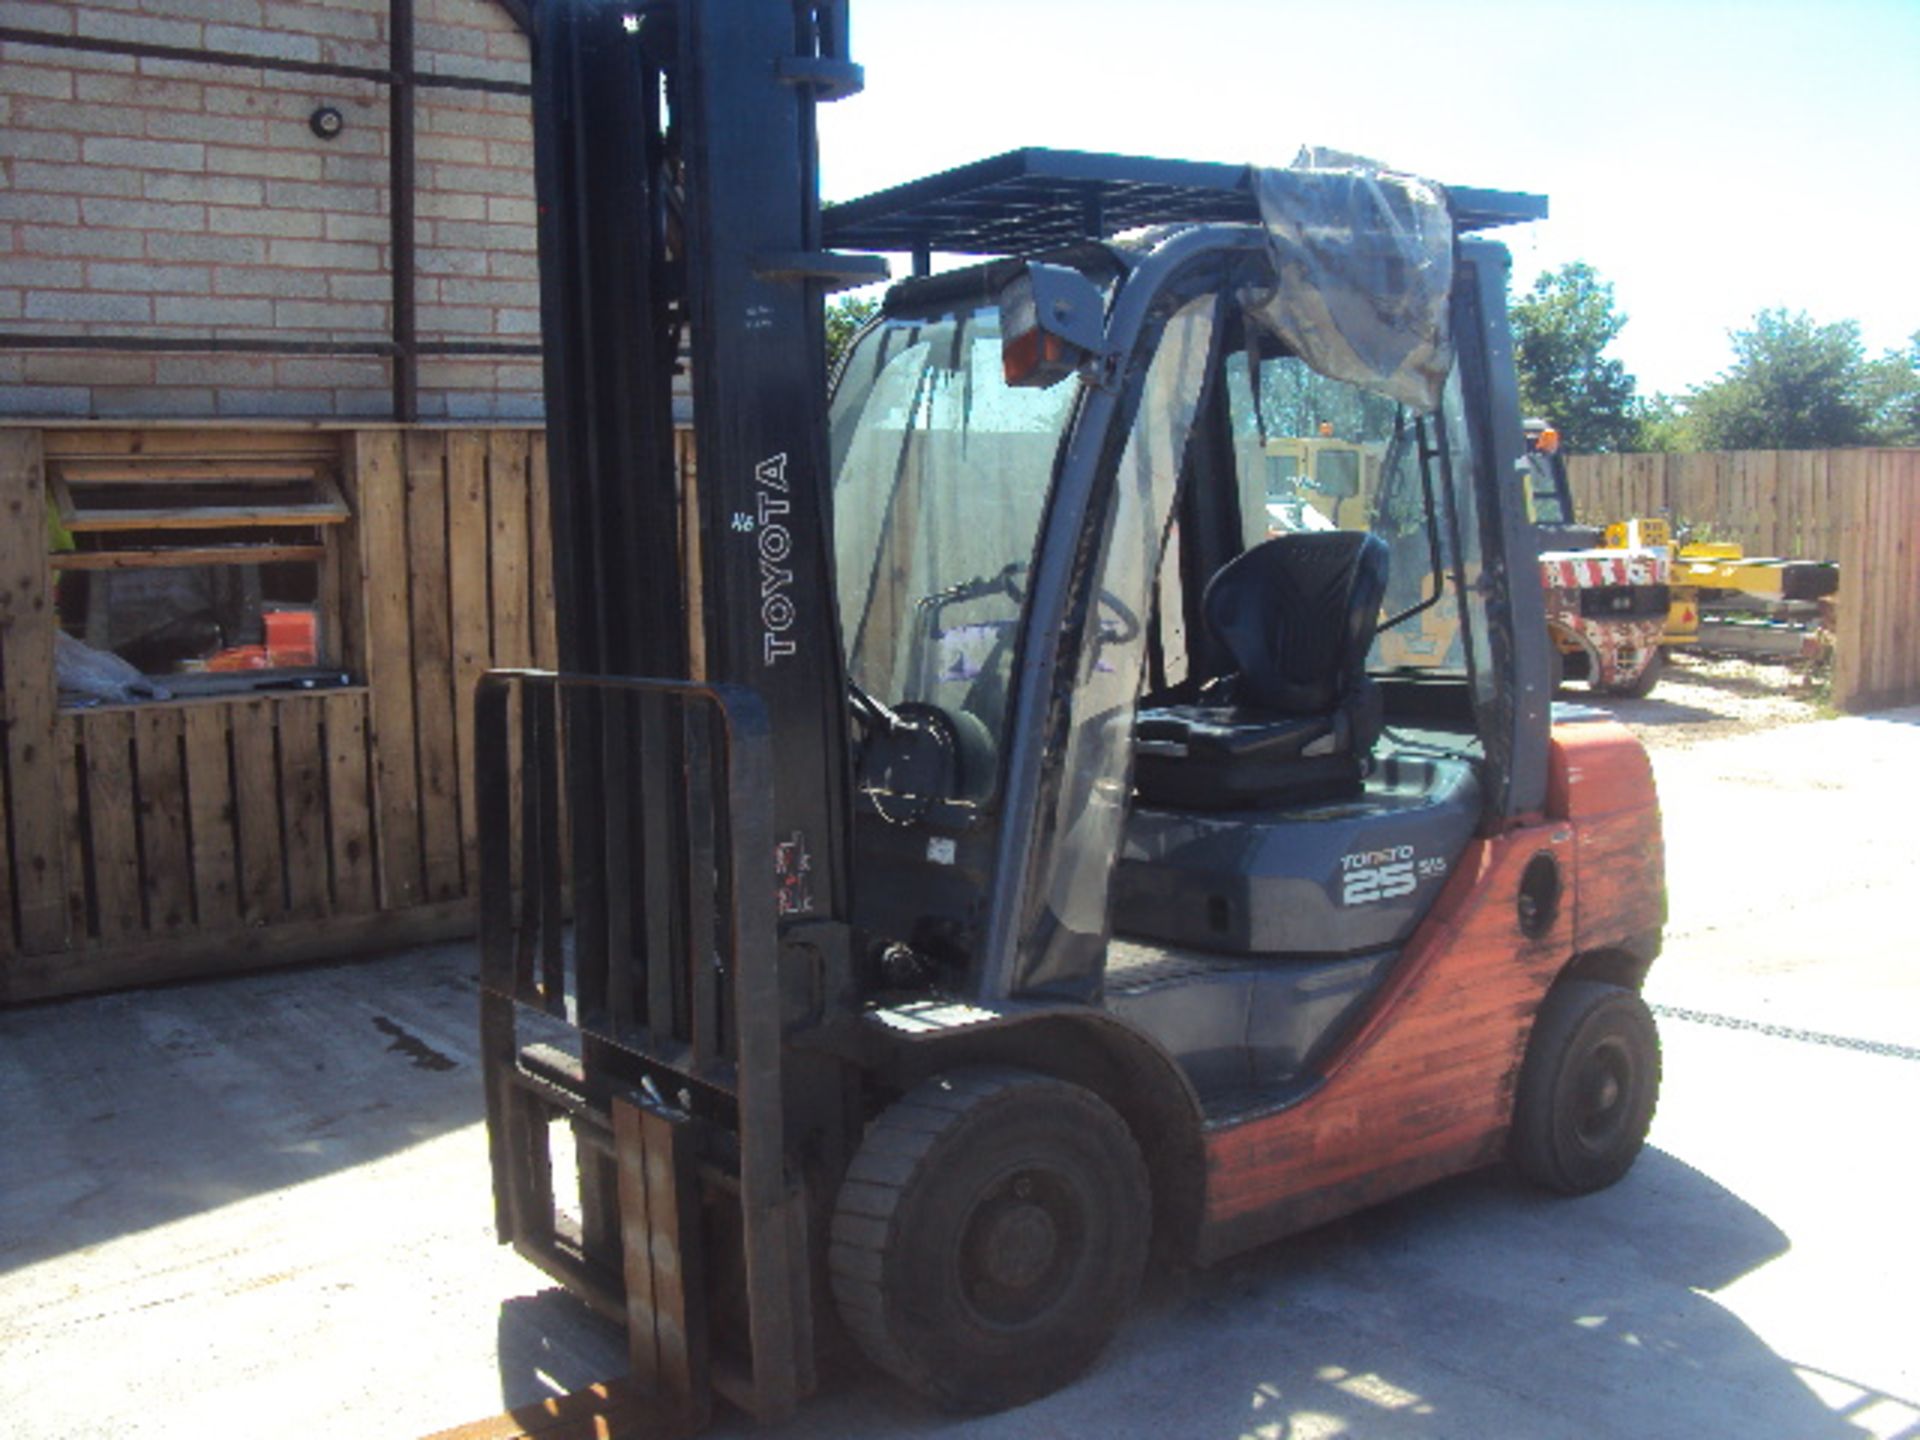 2008 TOYOTA 8FDF25 2.5t diesel driven forklift truck S/n: 8FDF25 11831 (6700 recorded hours) with